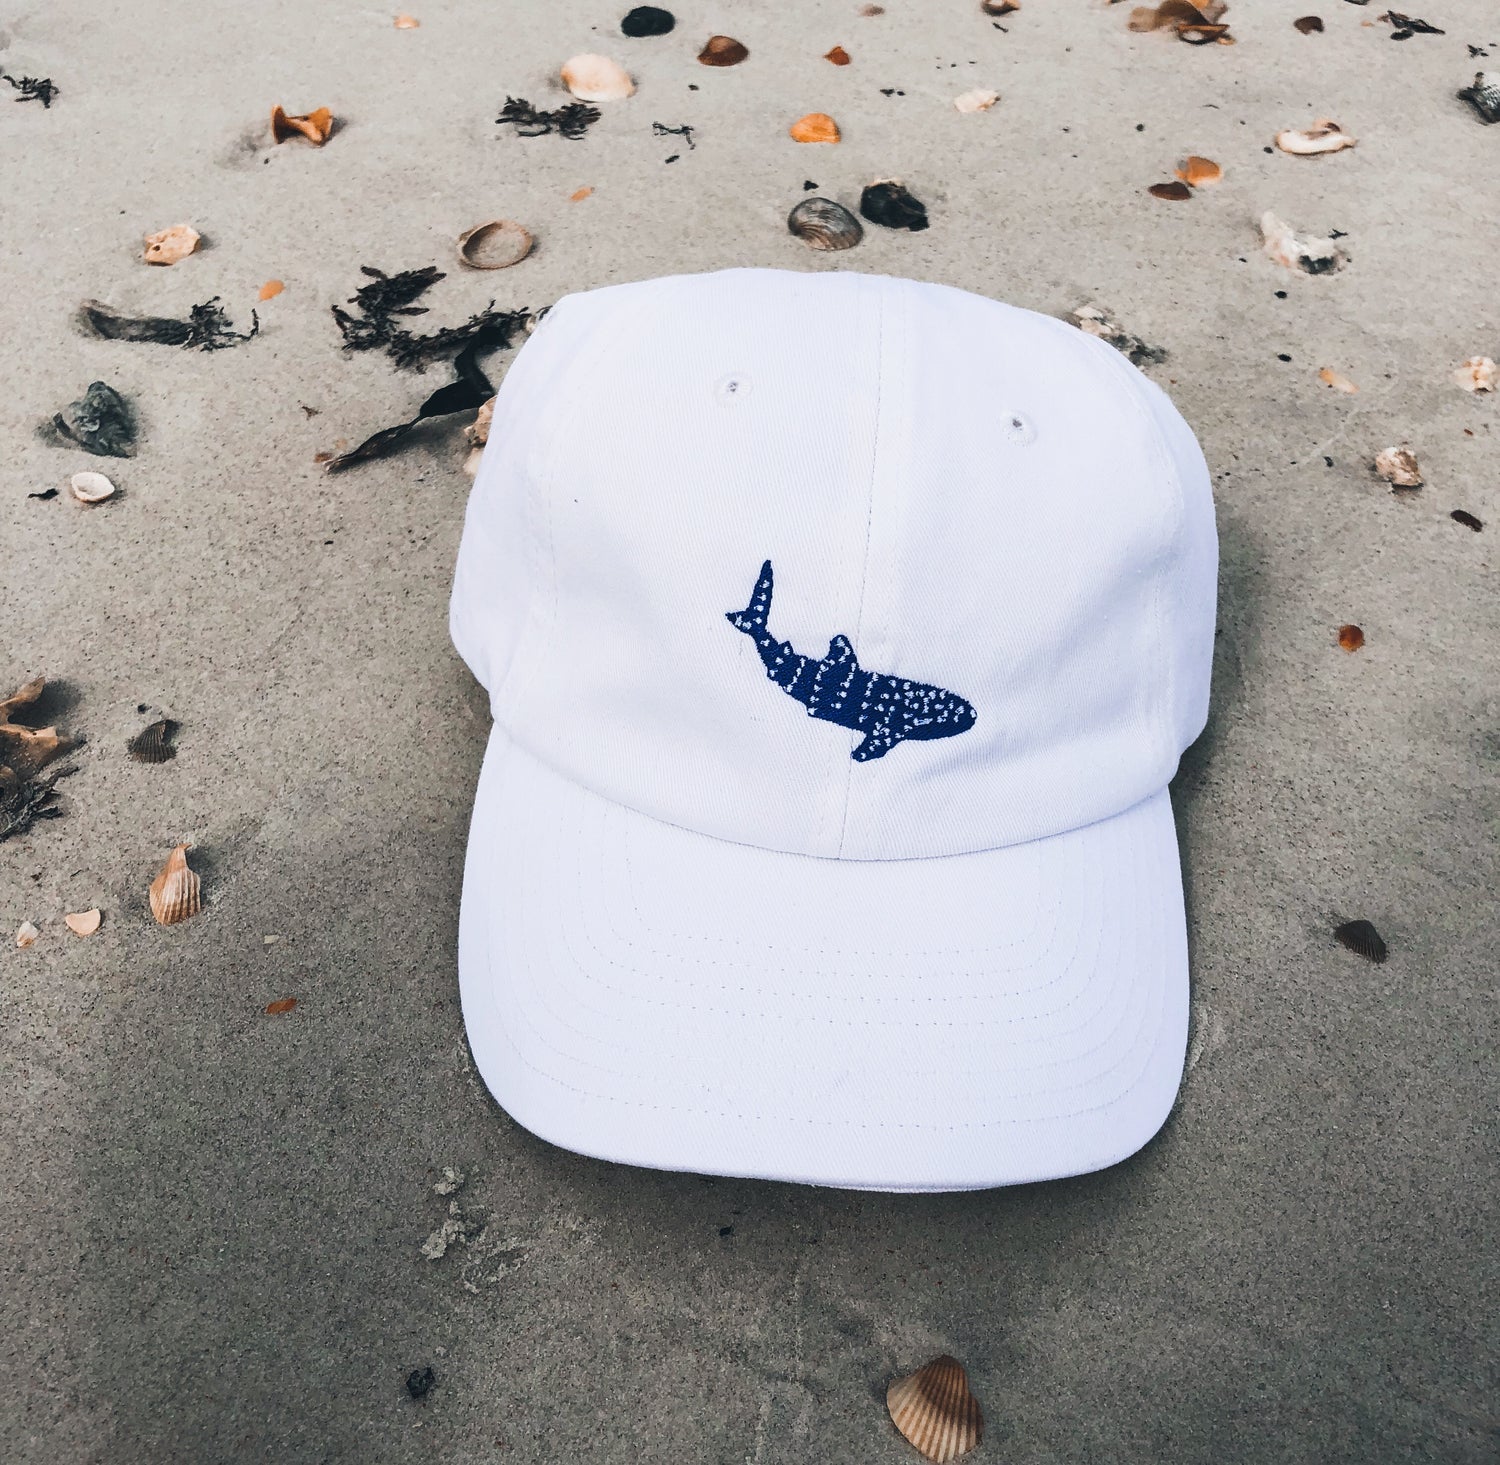 getpinkfit Whale Shark Embroidered Cotton Cap on a beach - 10% of profits donated to Mission Blue ocean conservation efforts - ethically and sustainably made clothing